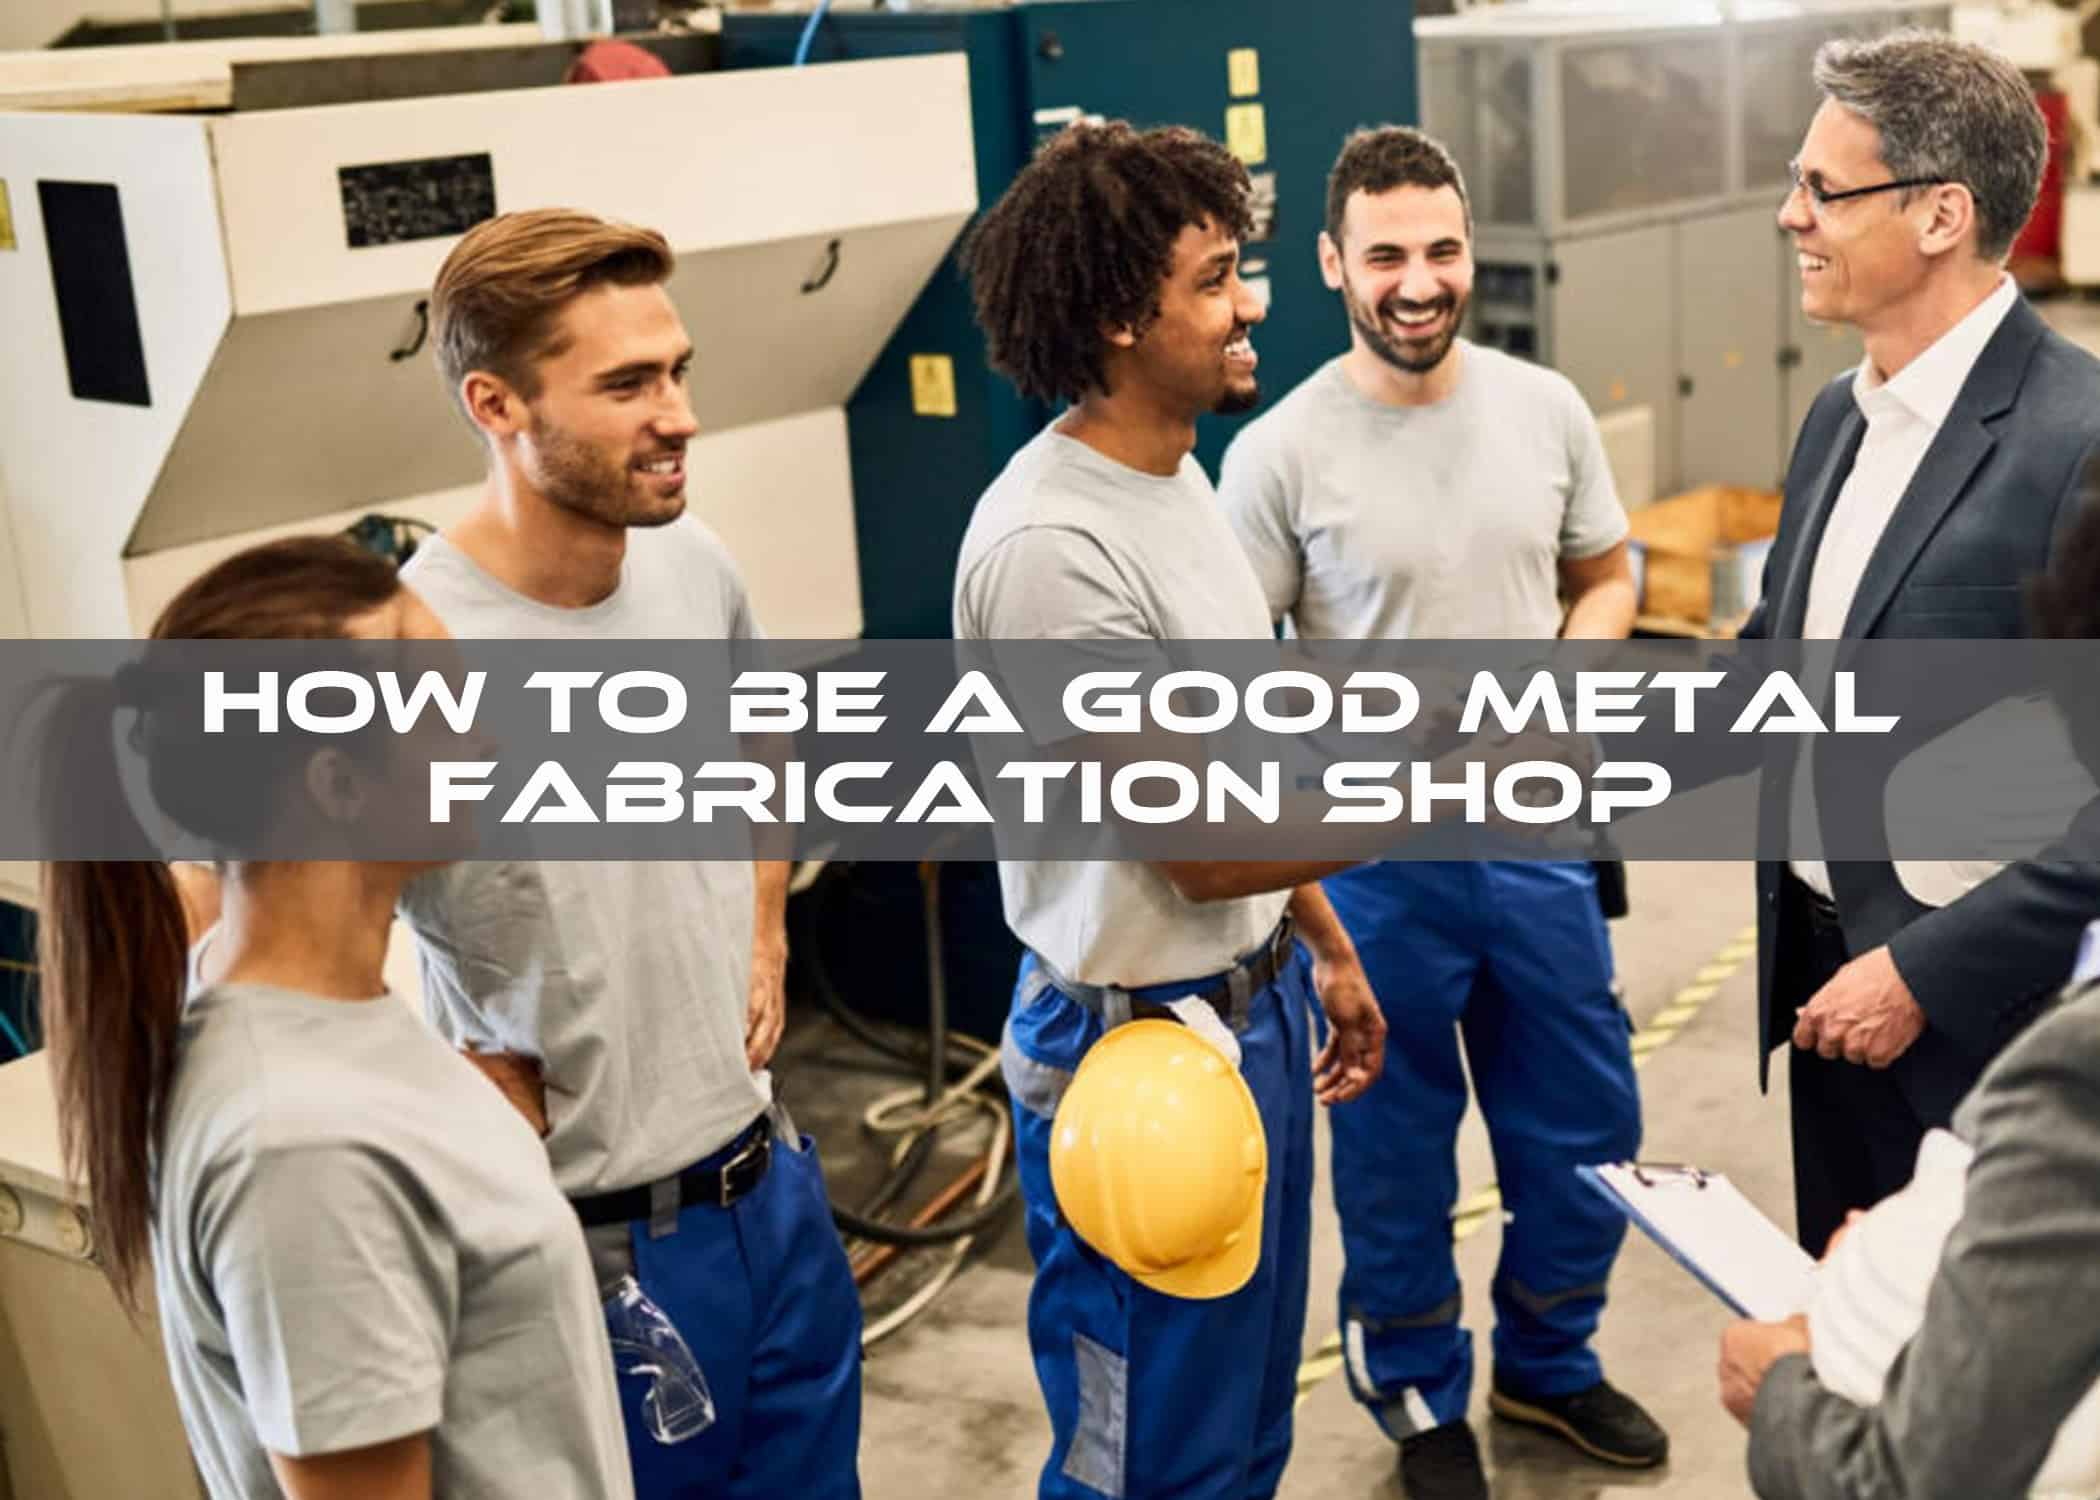 How to Be a Good Metal Fabrication Shop